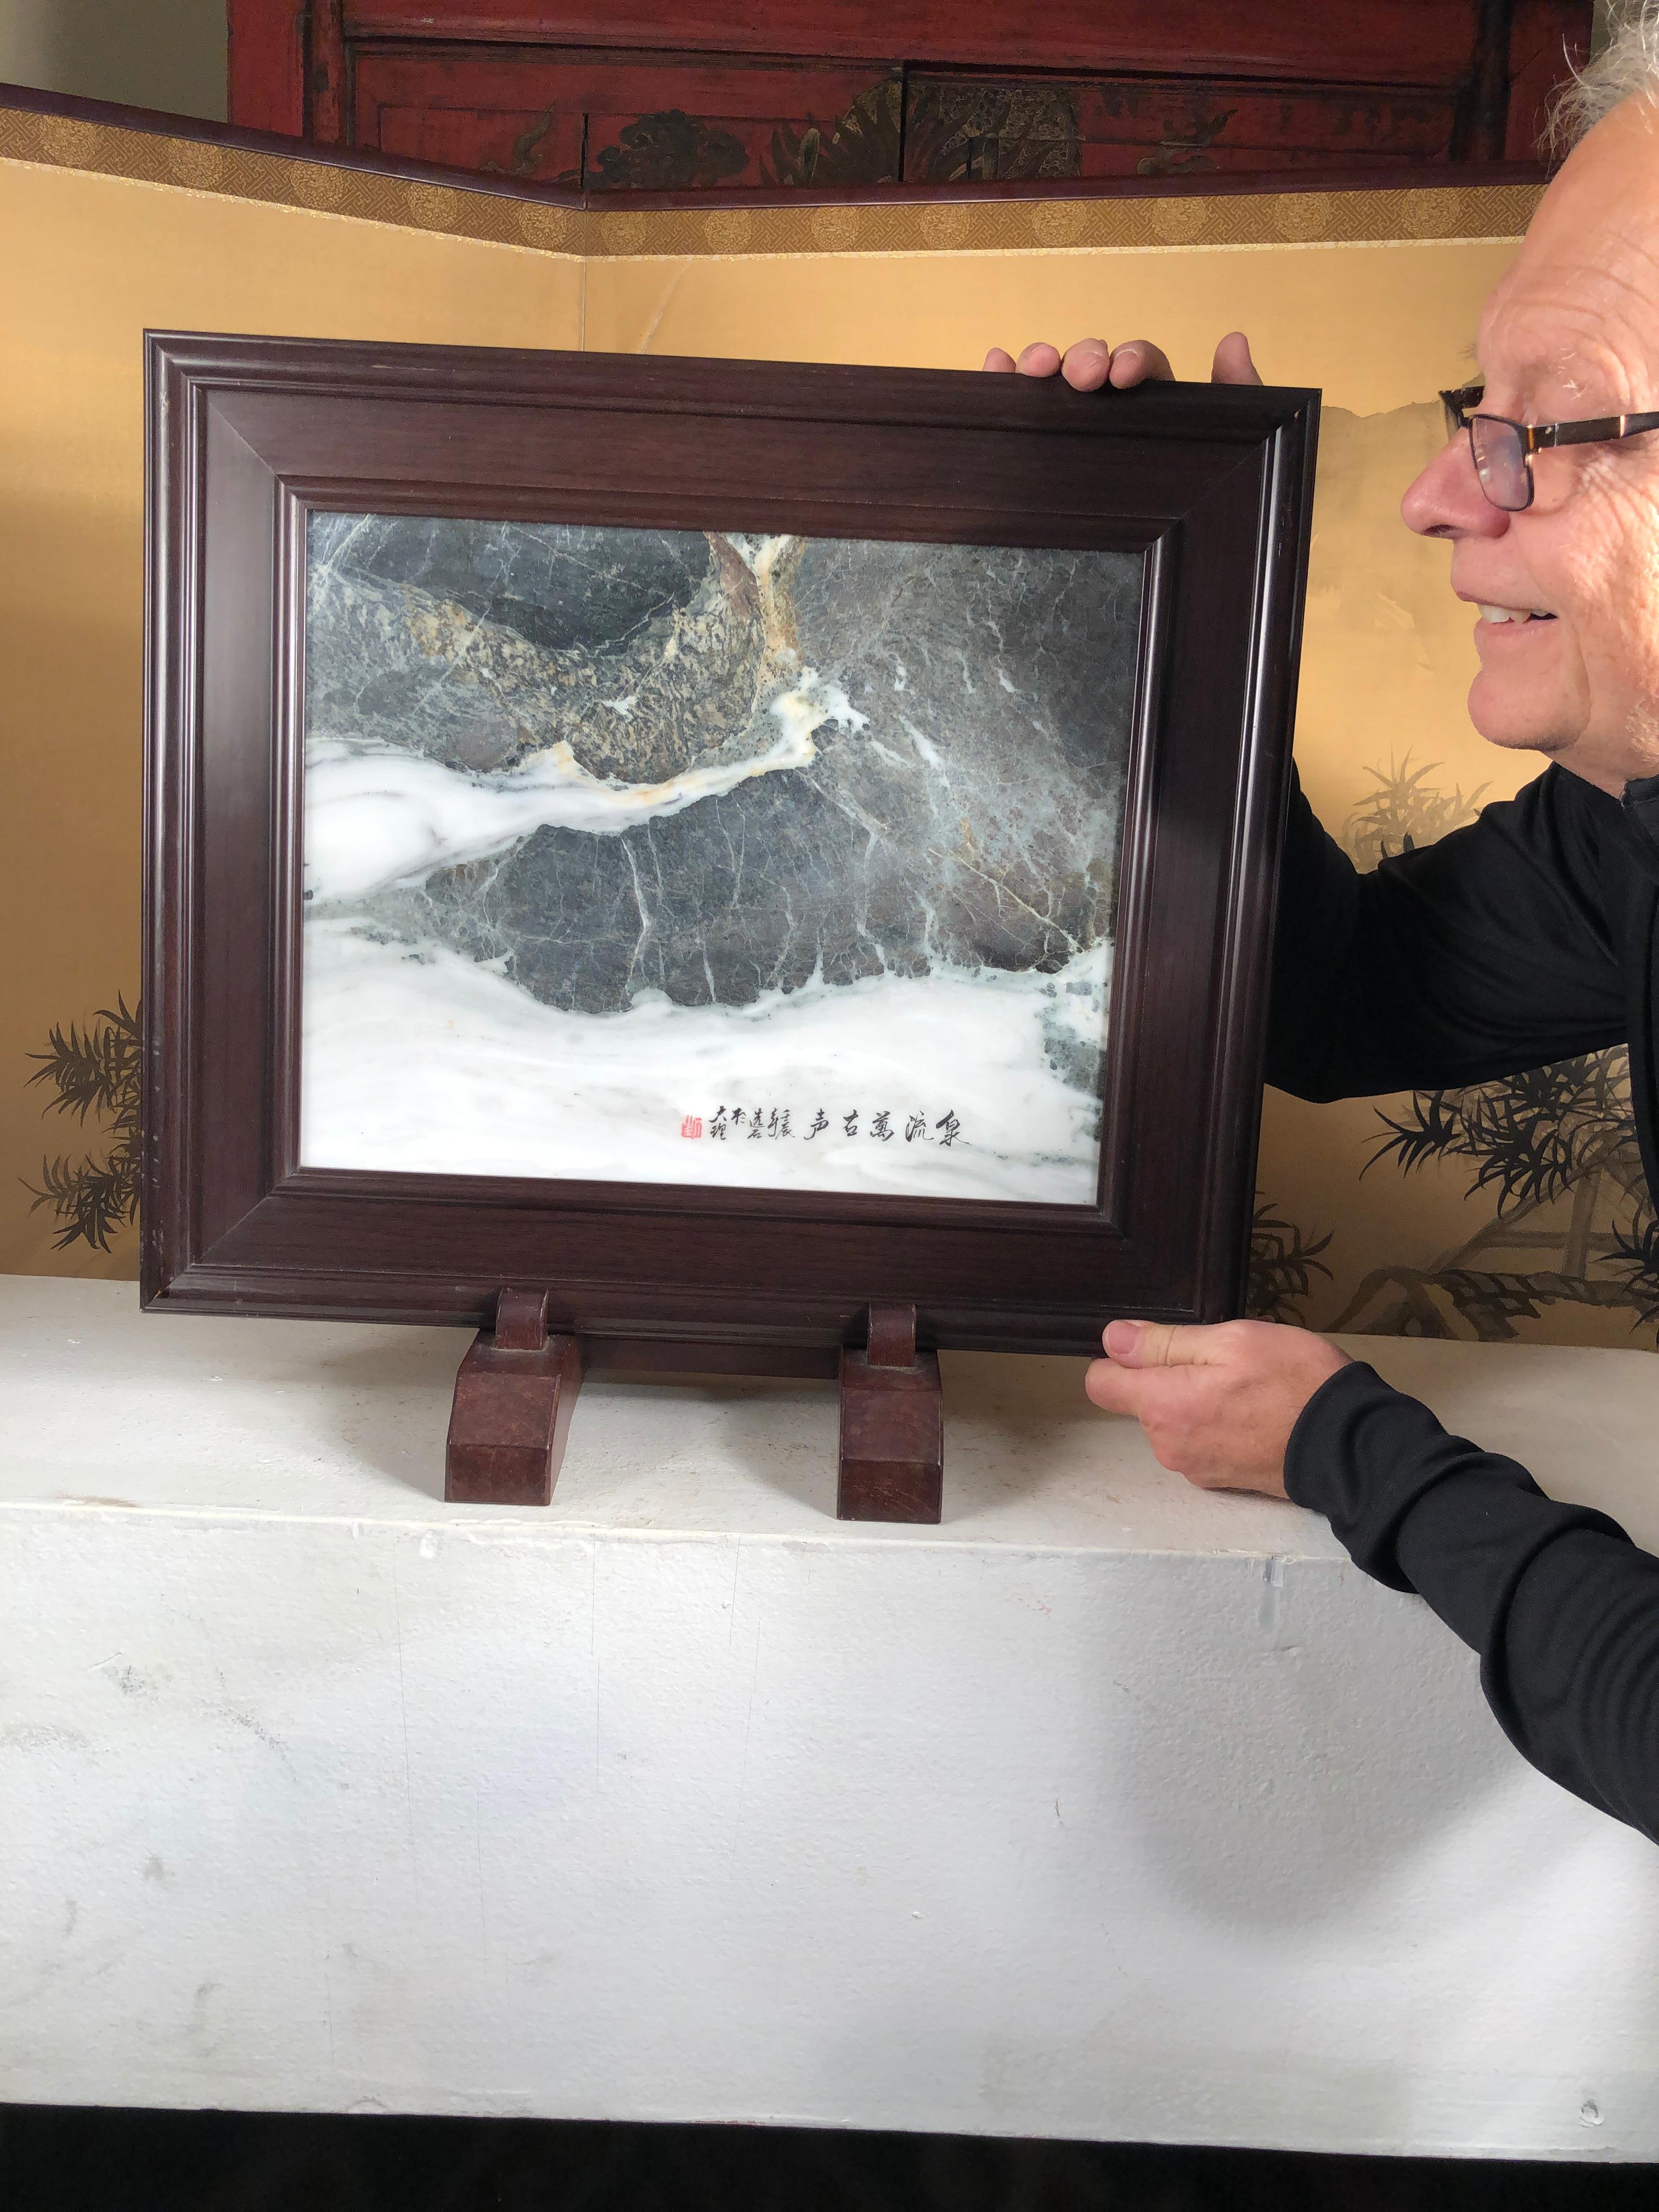 Extraordinary natural work, one of a kind. Custom framed

This Chinese extraordinary round natural stone painting of a possible mountain fishing stream could remind us of a unique experience and view in our lives. The powerful and colorful